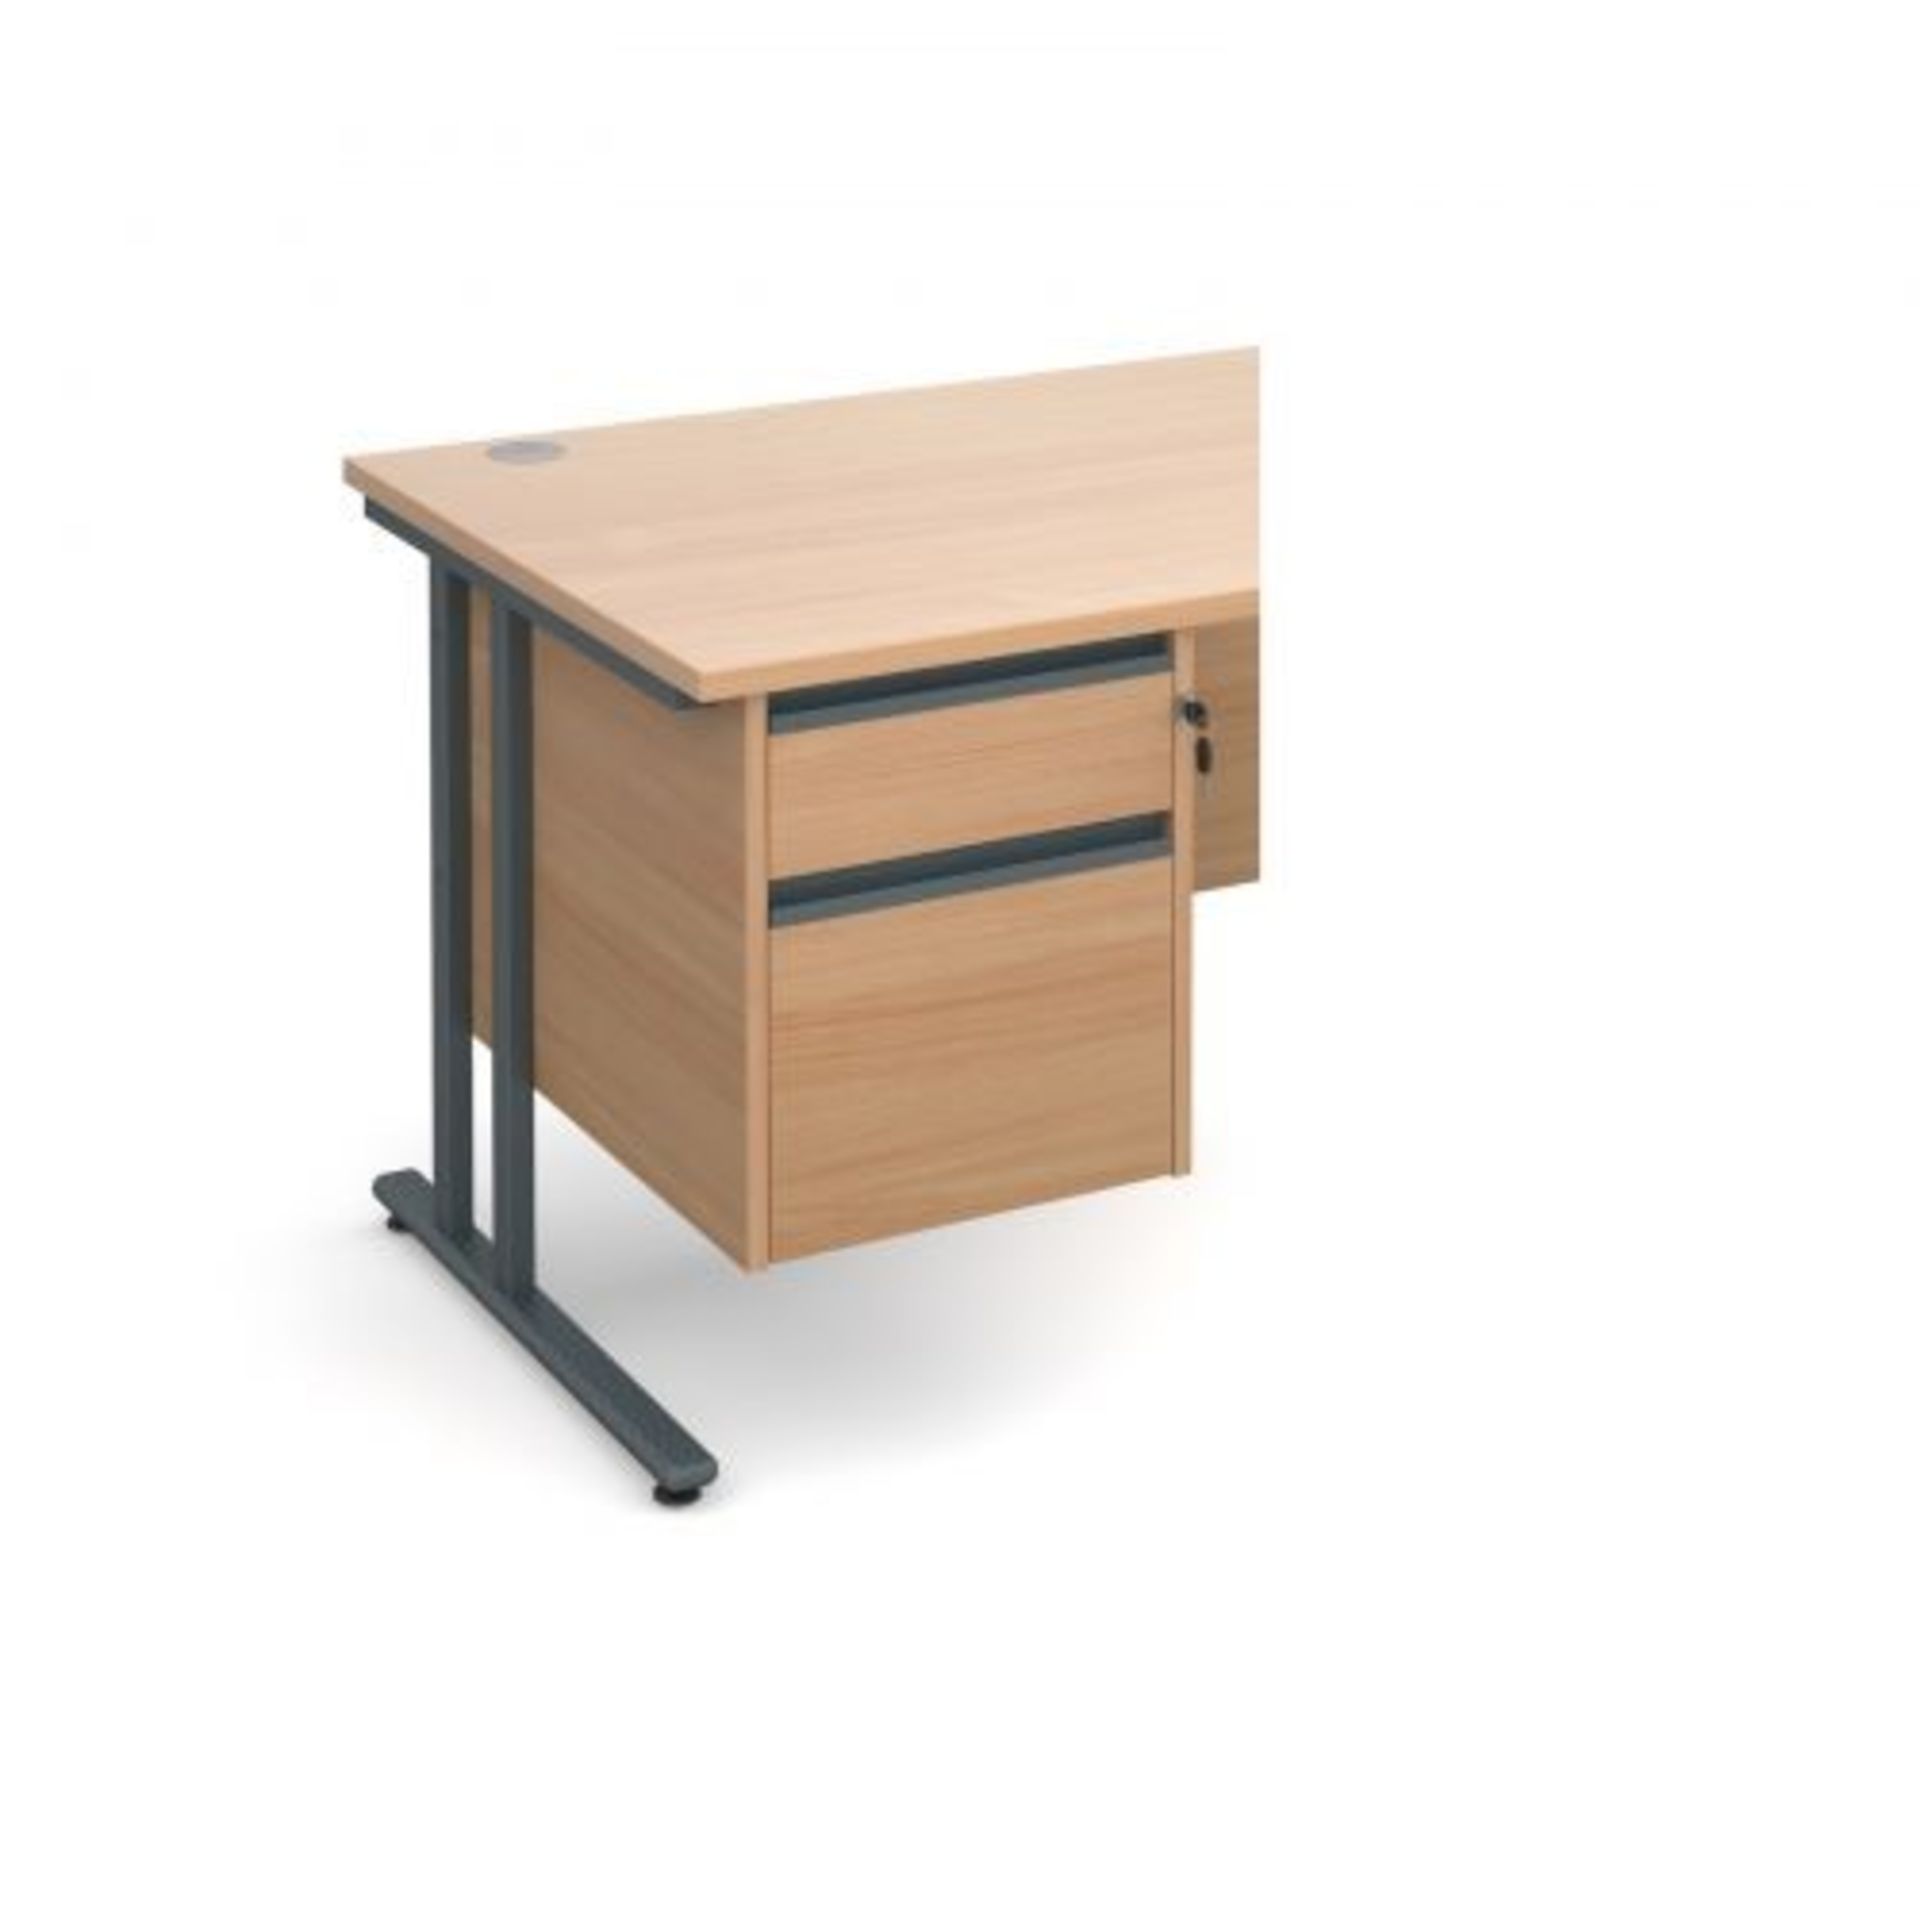 1 GRADE A BOXED MAESTRO 25 GL 2 DRAW FIXED PEDESTAL IN BEECH / RRP £119.76 (VIEWING HIGHLY